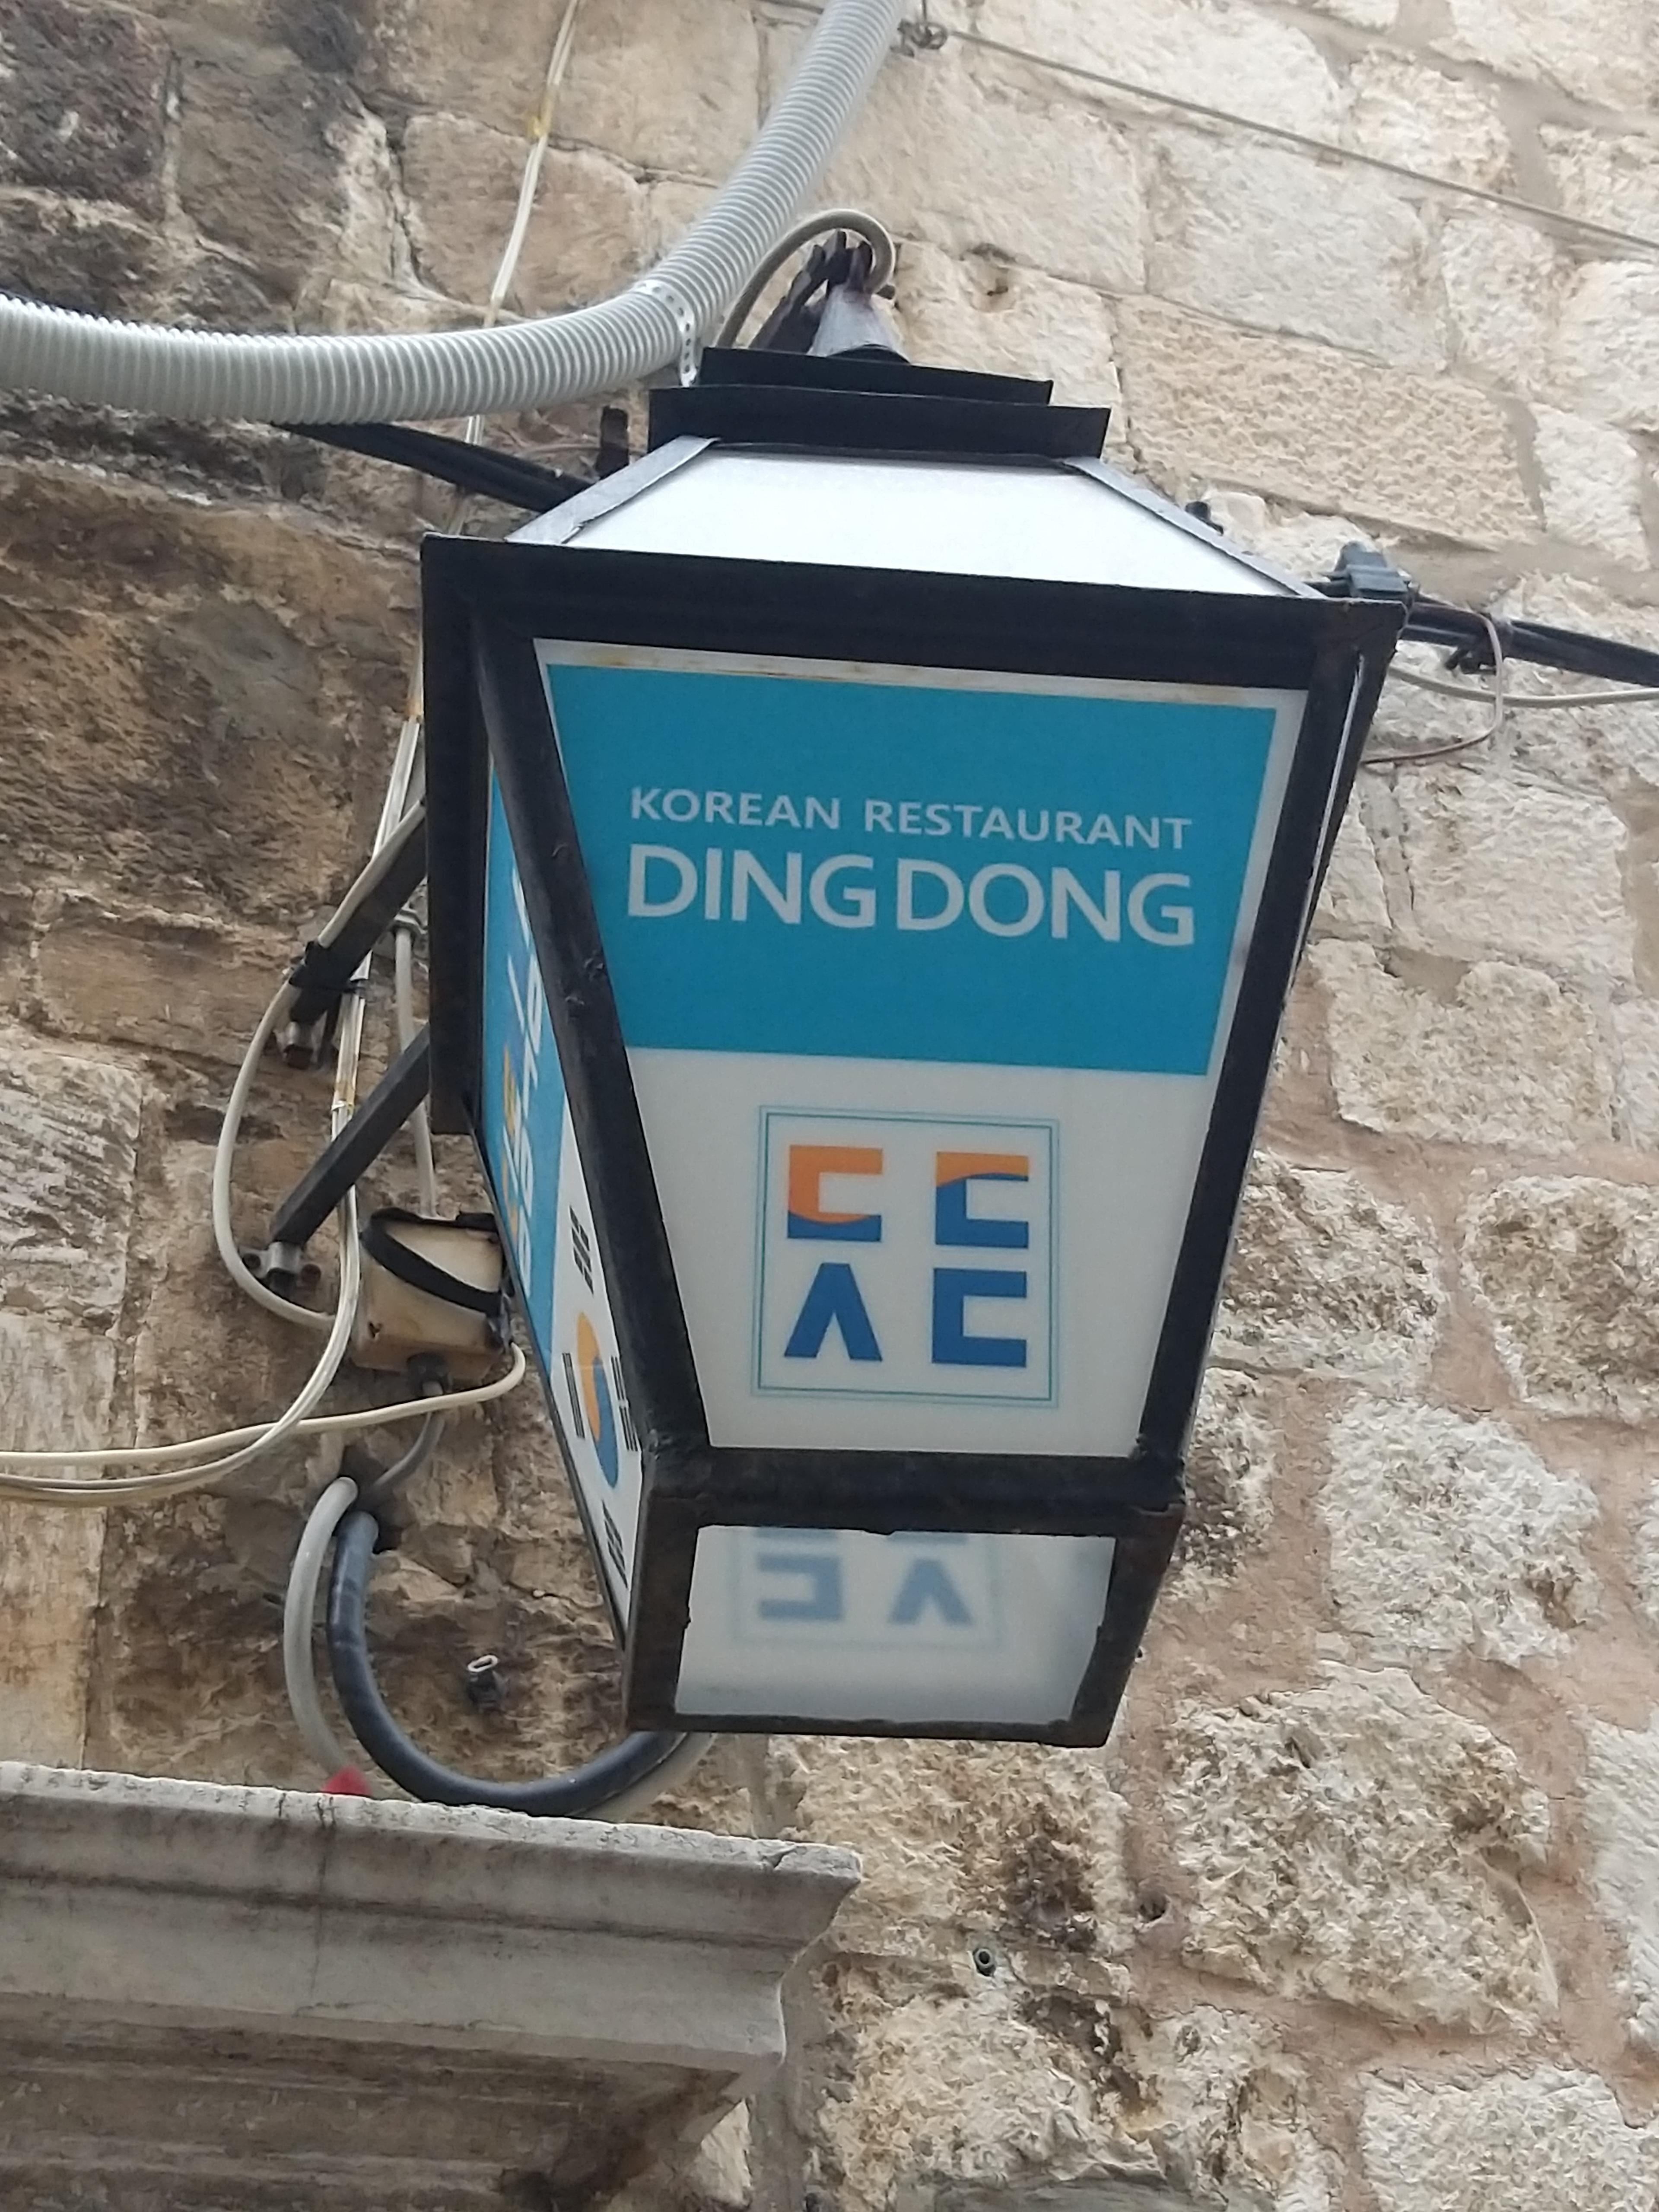 Cover image of this place Ding Dong Korean Restaurant